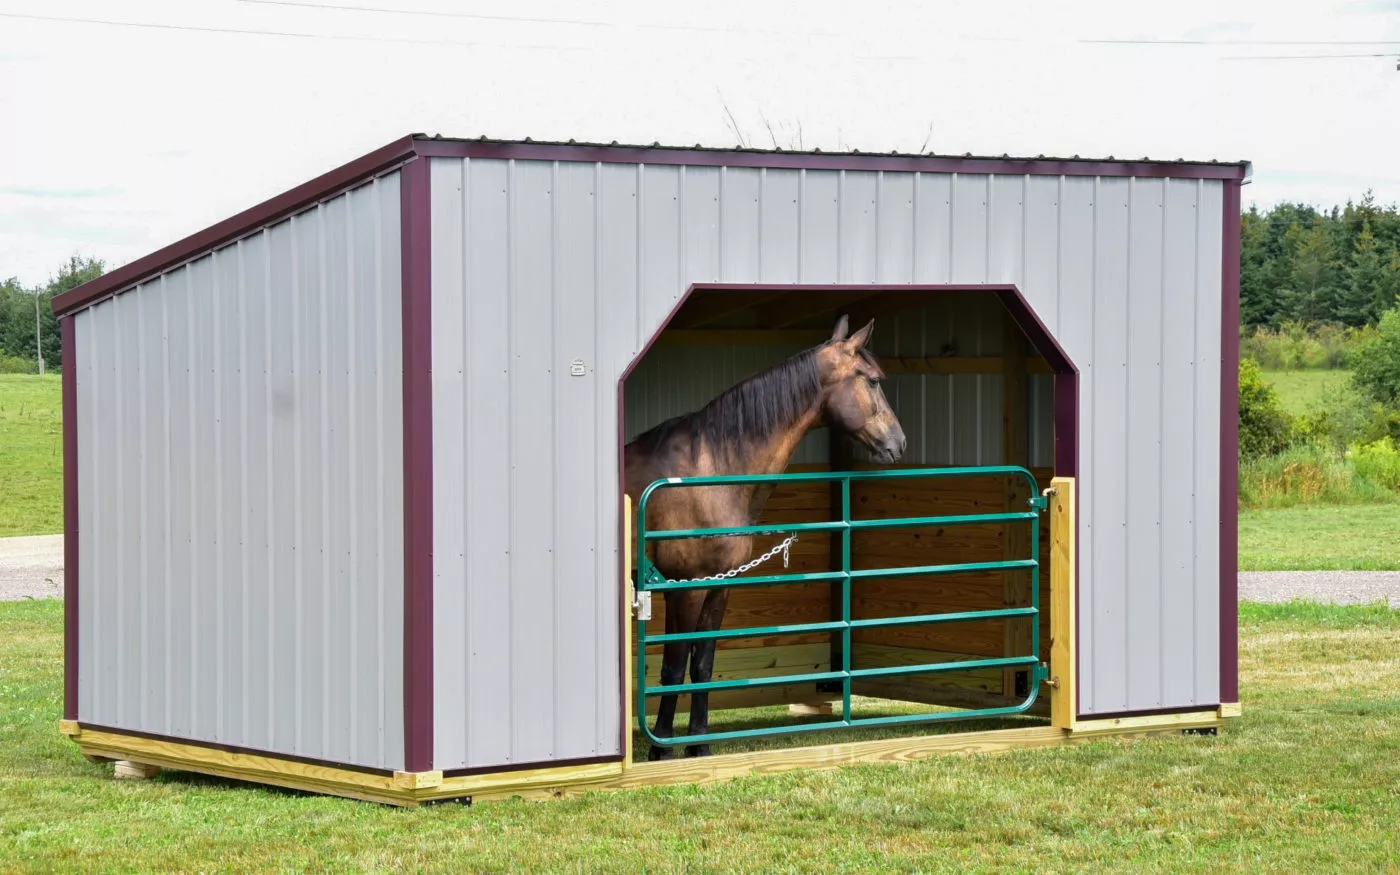 Horse Shelters For Sale In Evart, Michigan